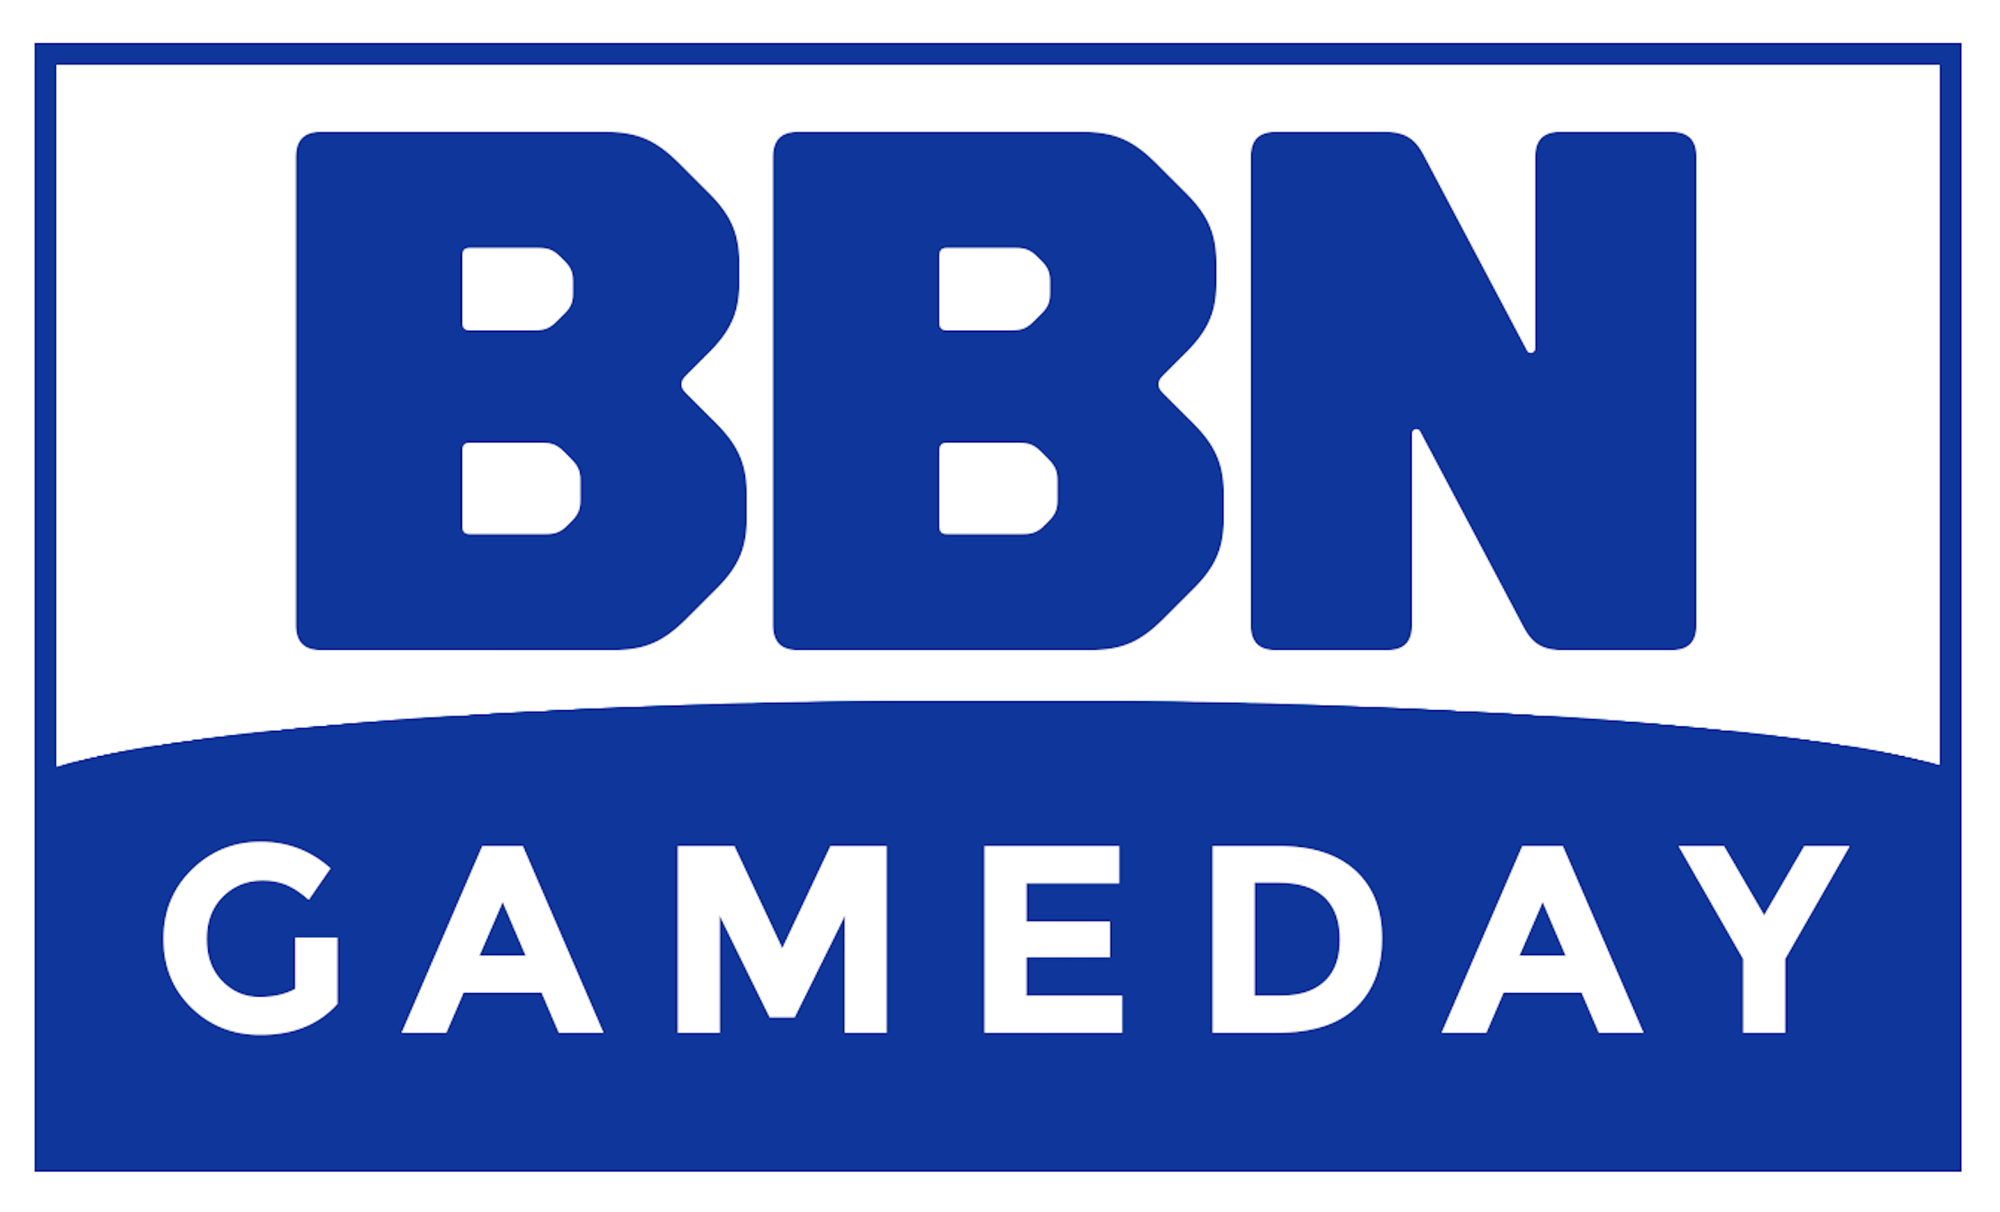 BBN Gameday January 29th 2022